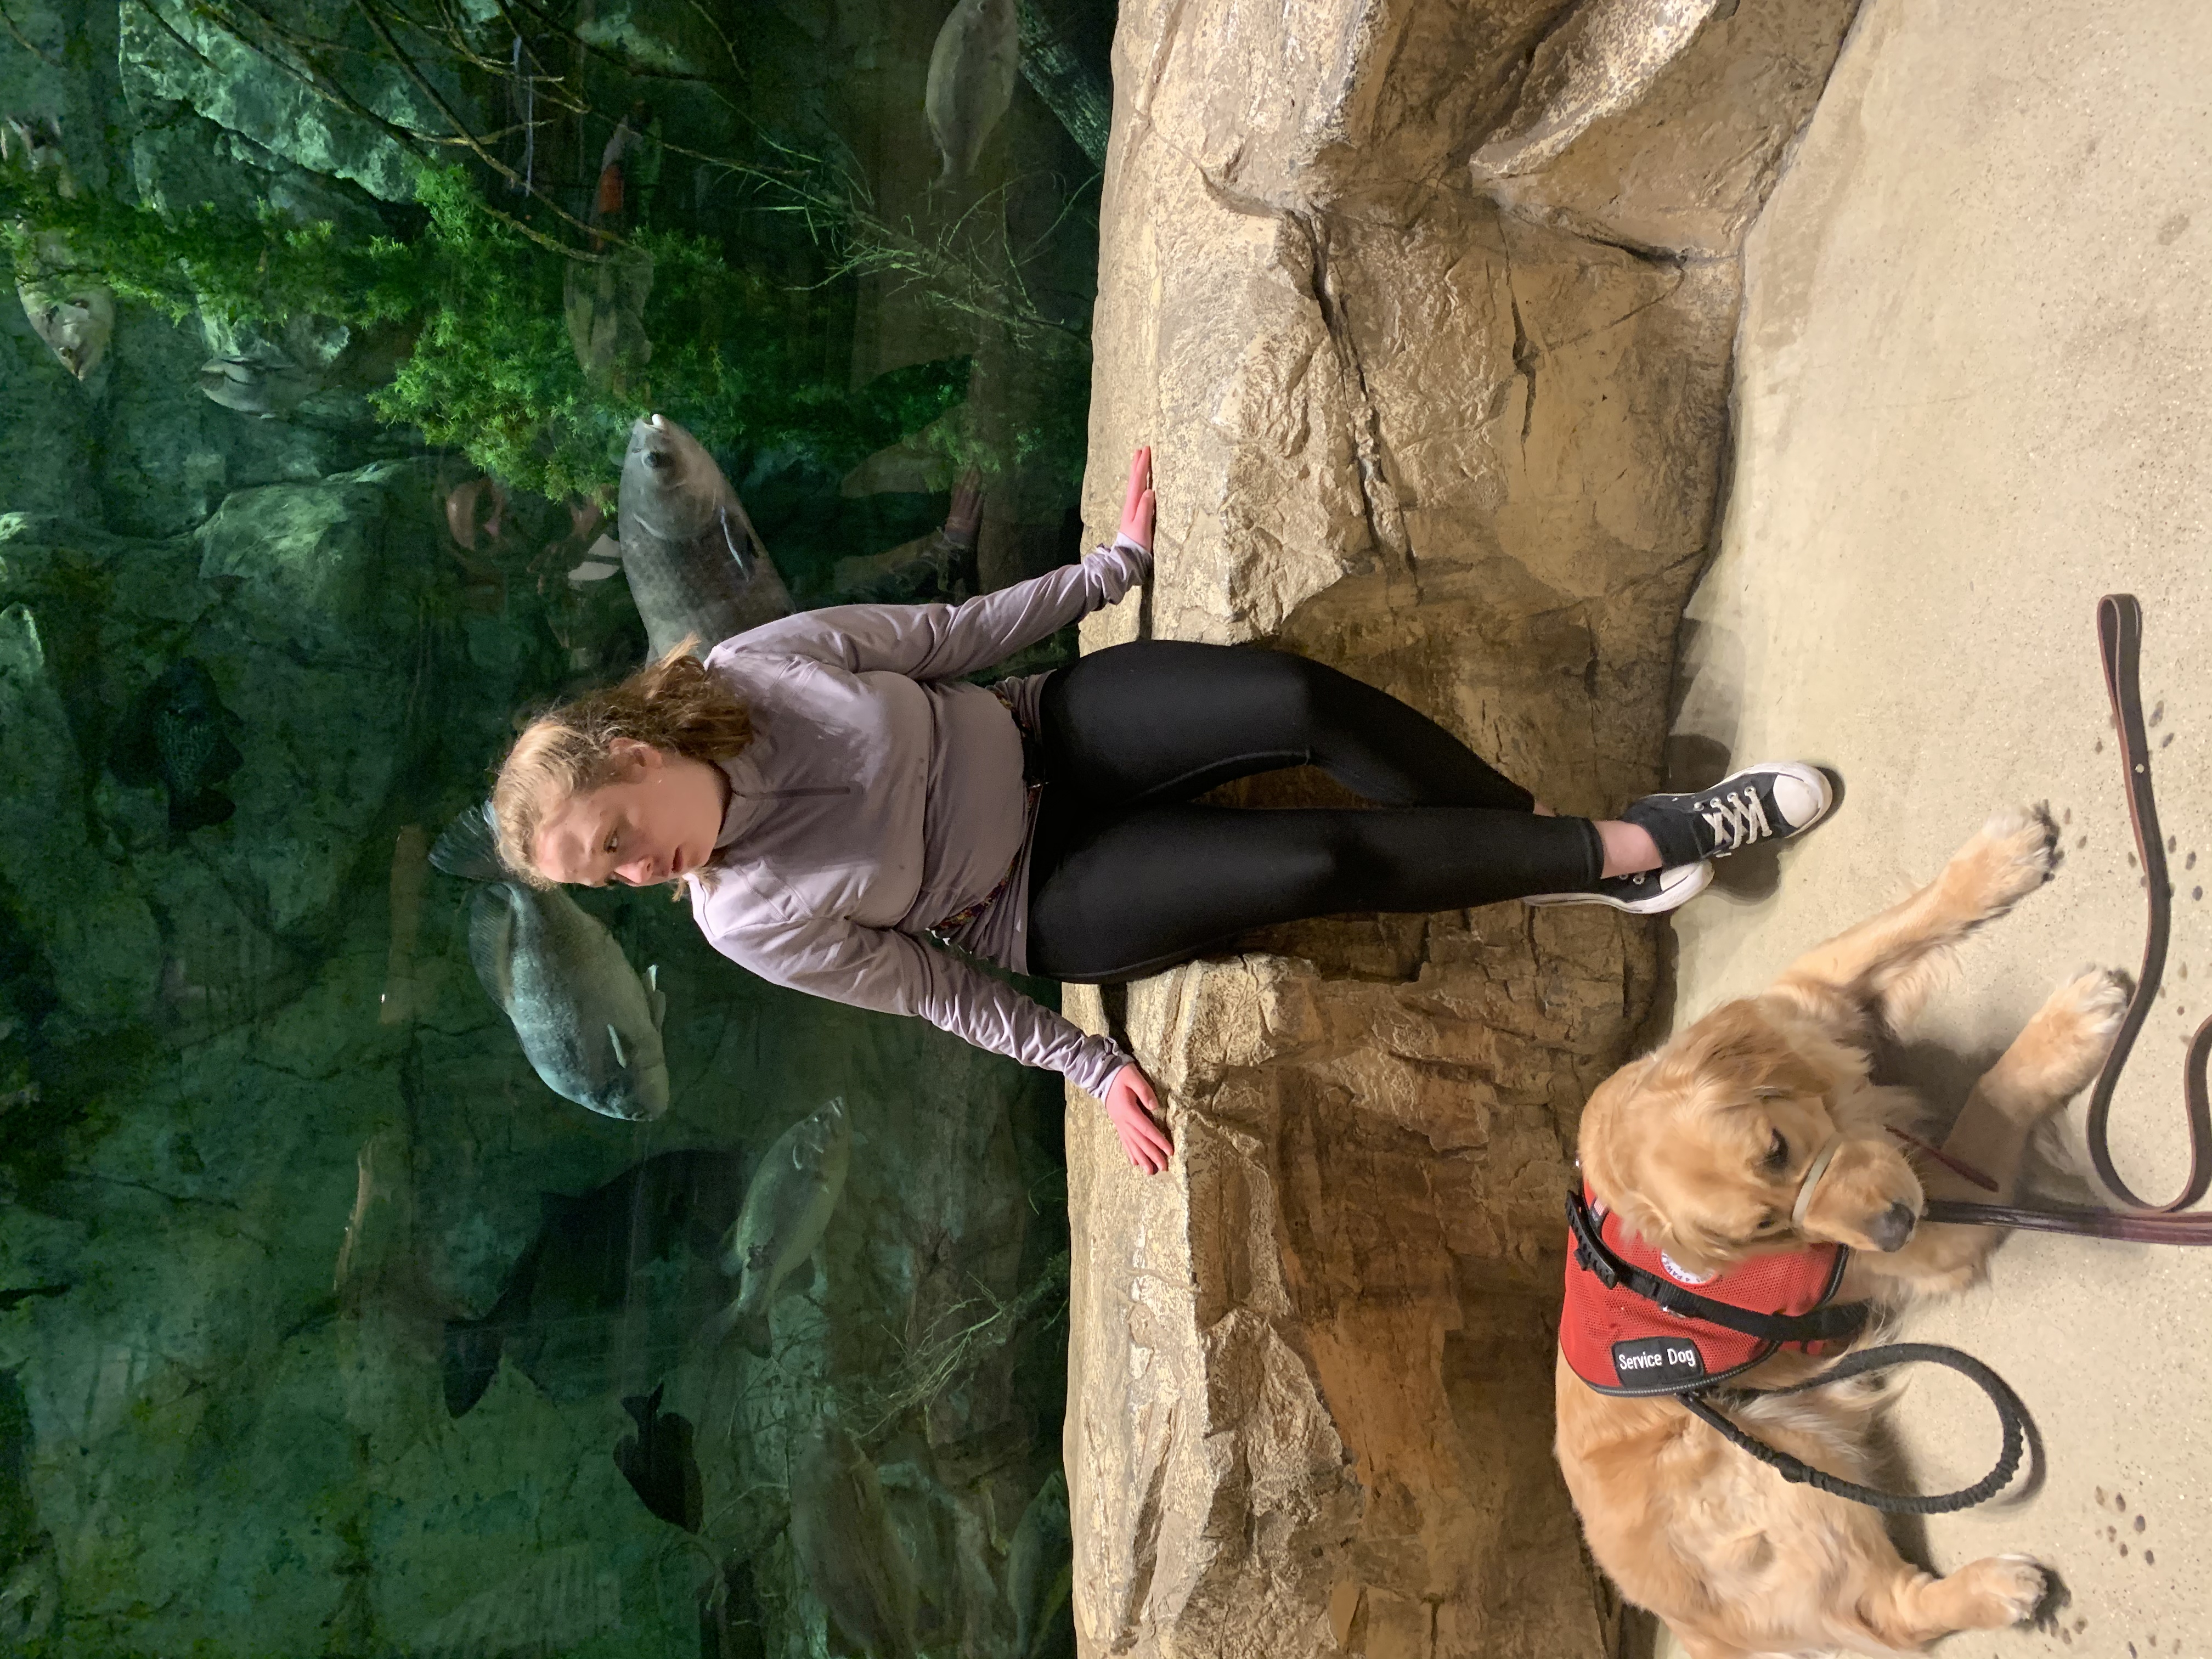 Girl in front of aquarium with service dog